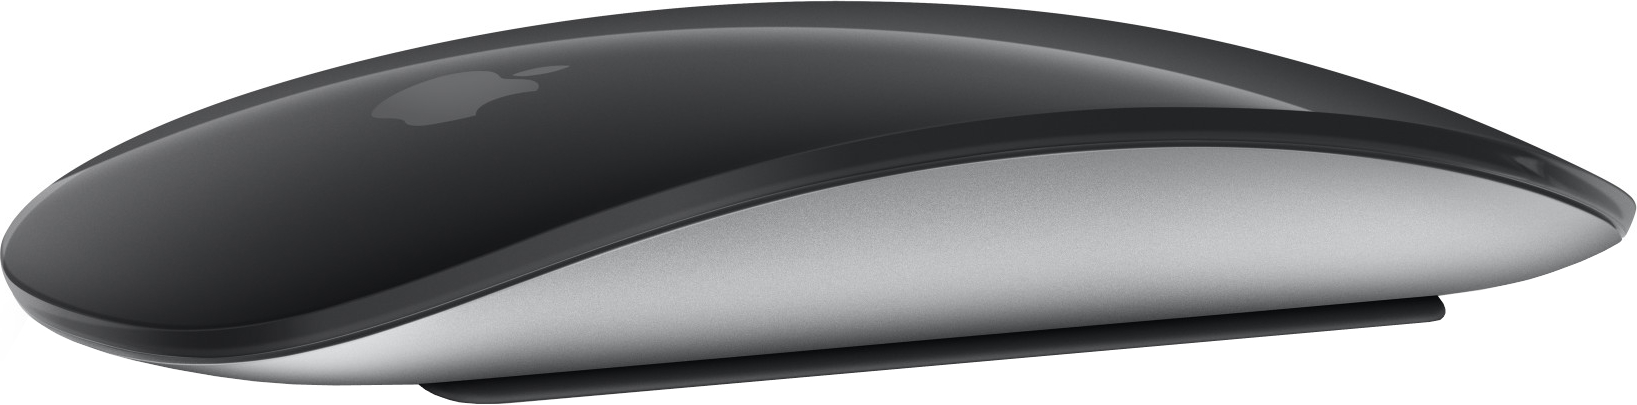 Apple Magic Mouse 3 Multi-Touch Surface Black